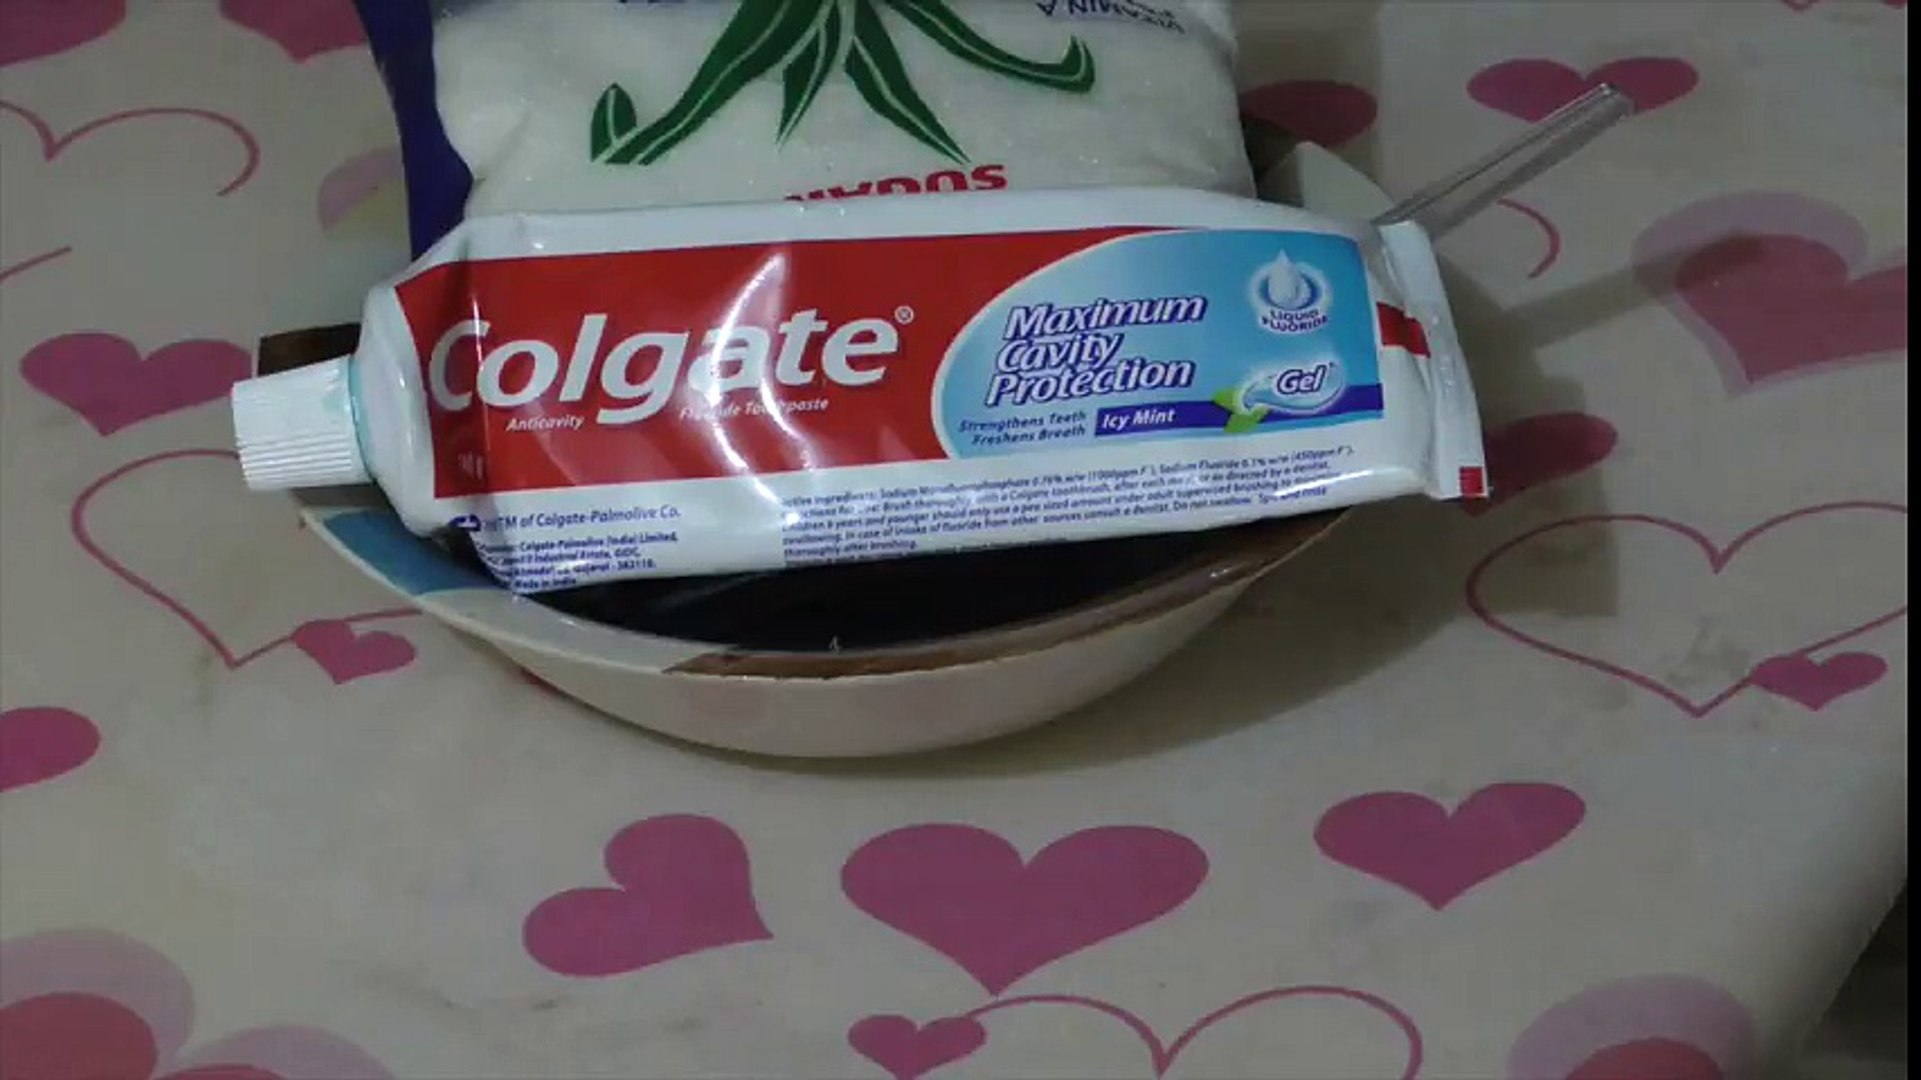 Colgate Toothpaste Slime With Sugar How To Make Slime Sugar Super Easy Slime